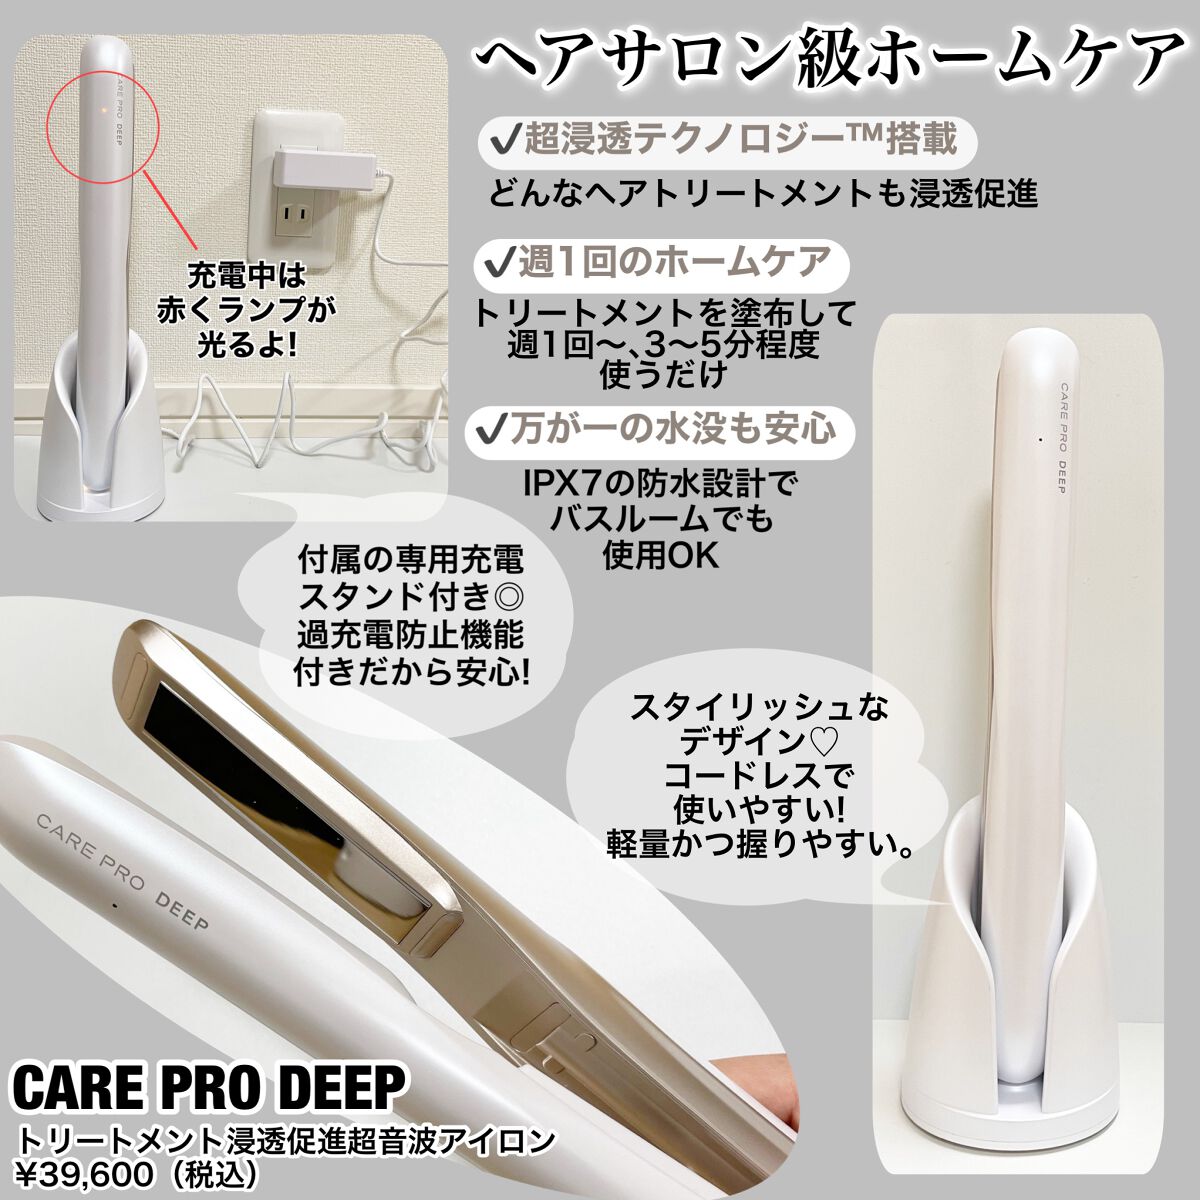 CARE PRO DEEP｜CARE PROの口コミ - ＼自宅でサロン級ヘアケア  ／ by